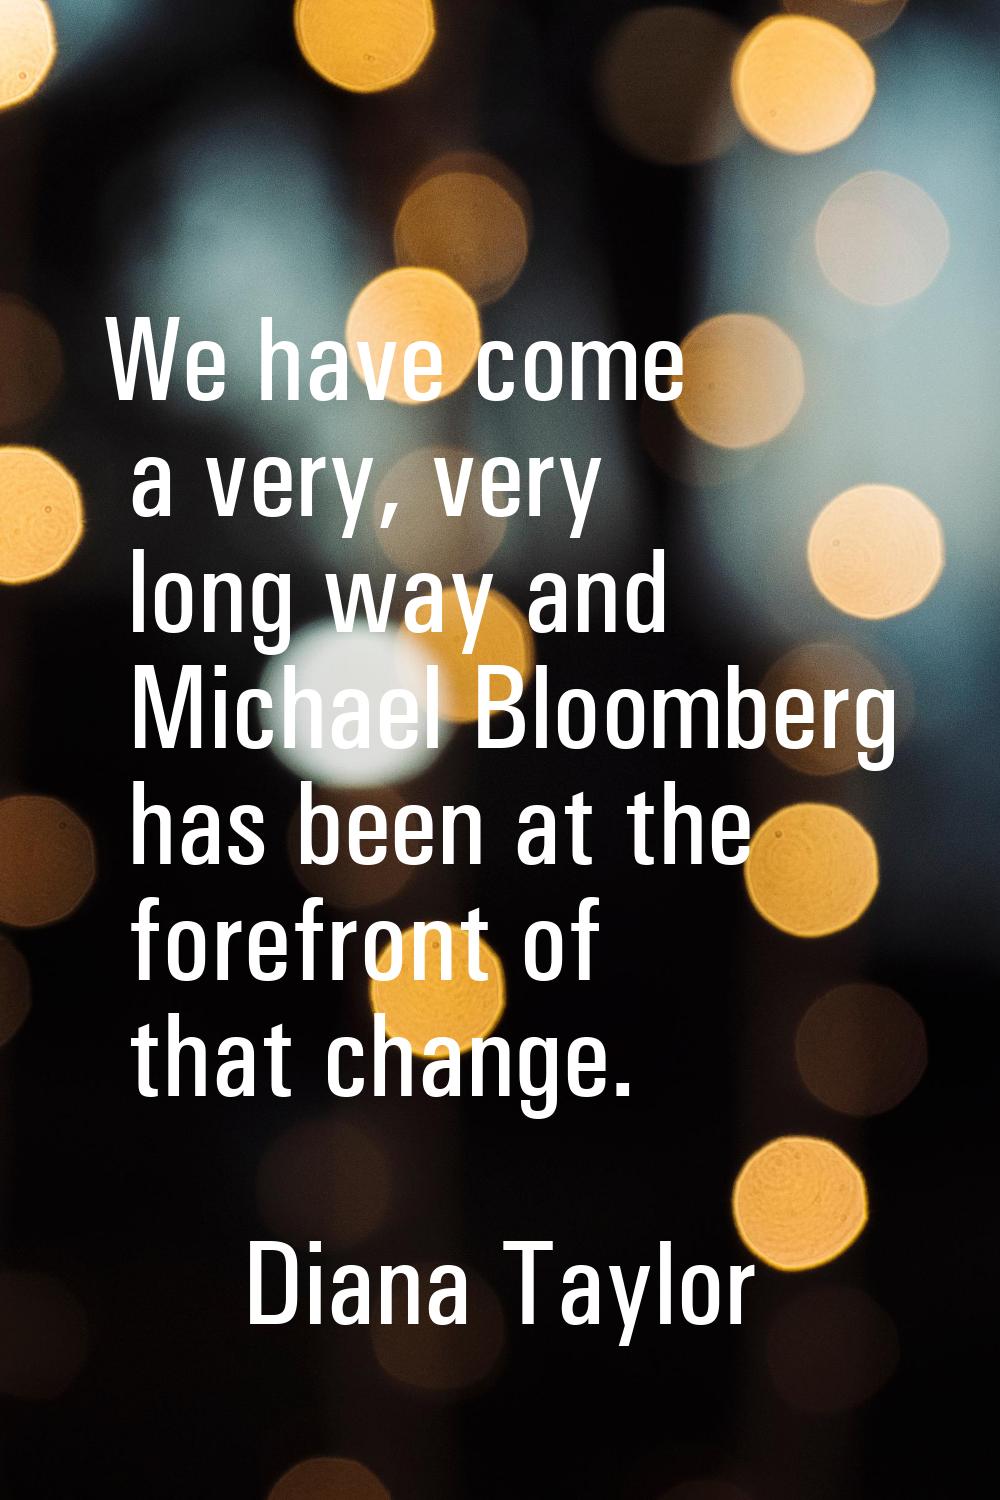 We have come a very, very long way and Michael Bloomberg has been at the forefront of that change.